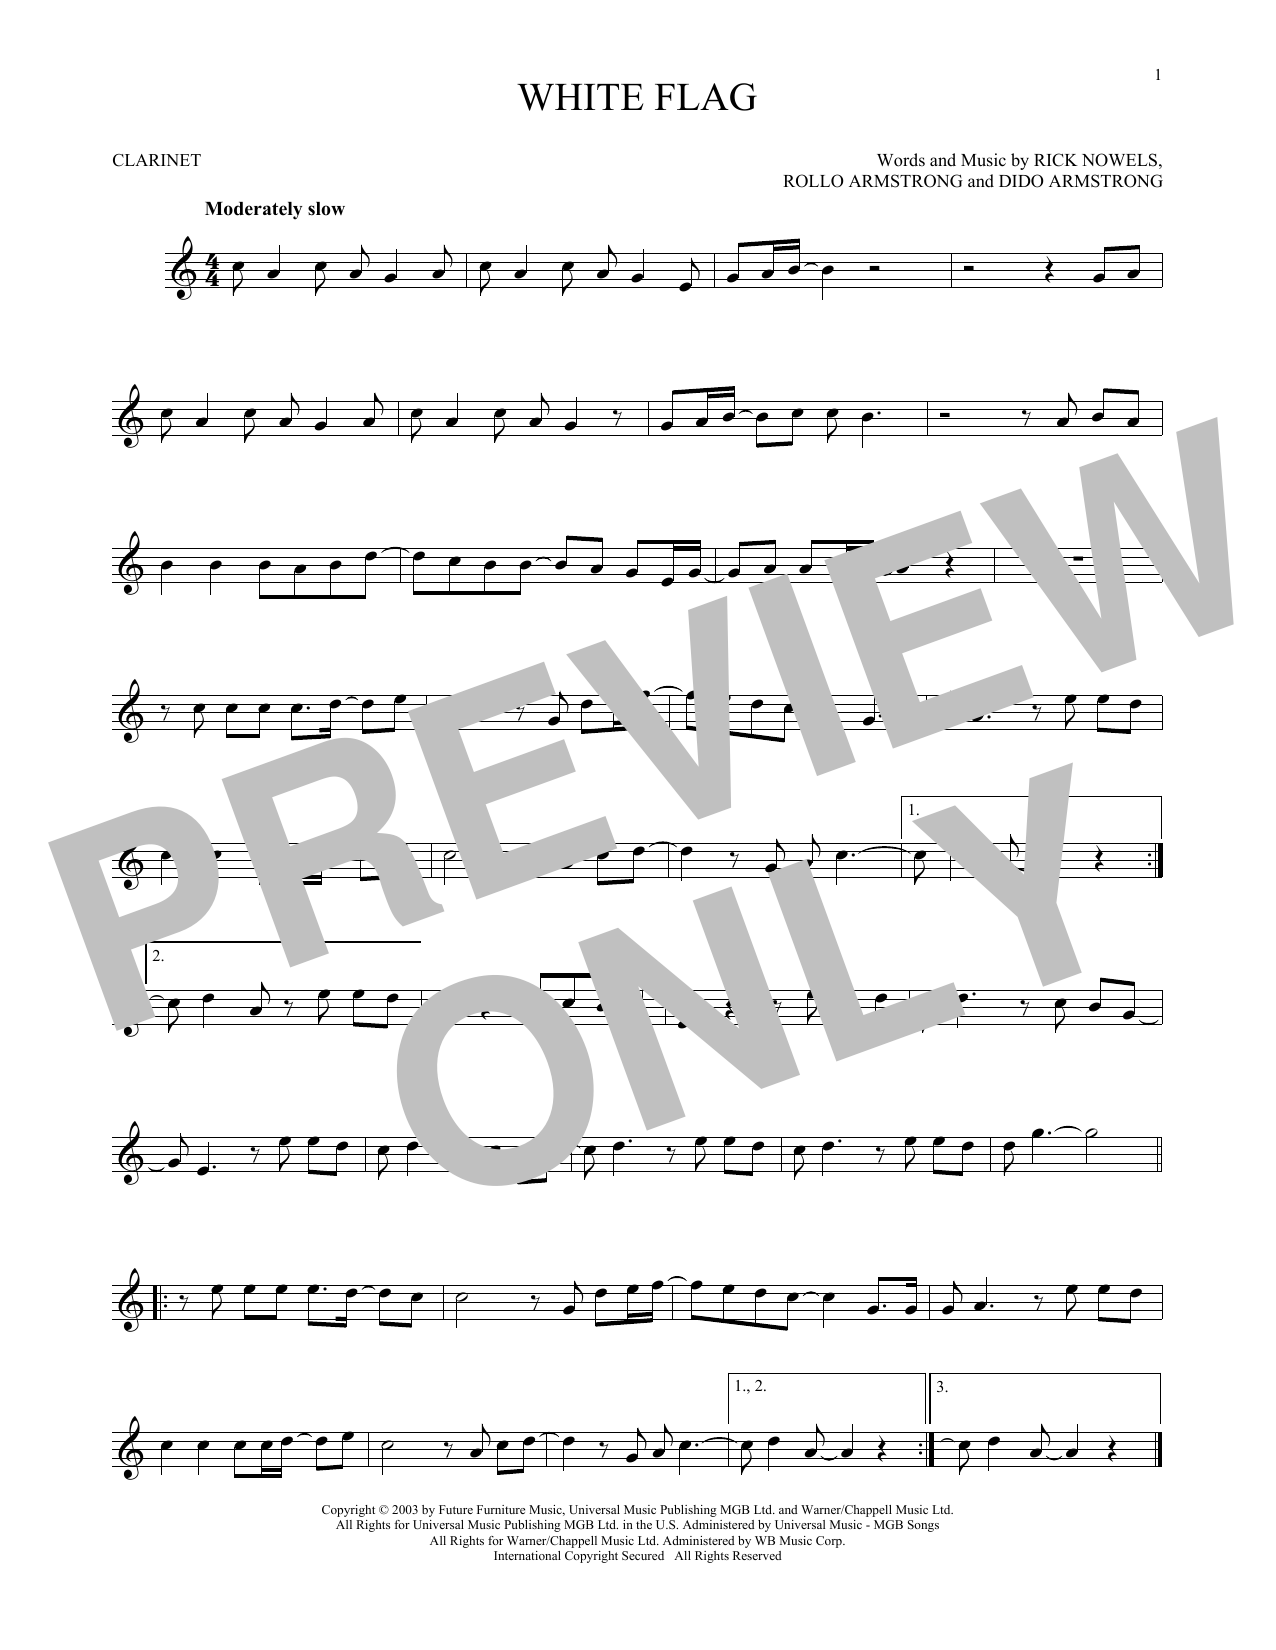 Learn Dido White Flag sheet music notes, chords. 